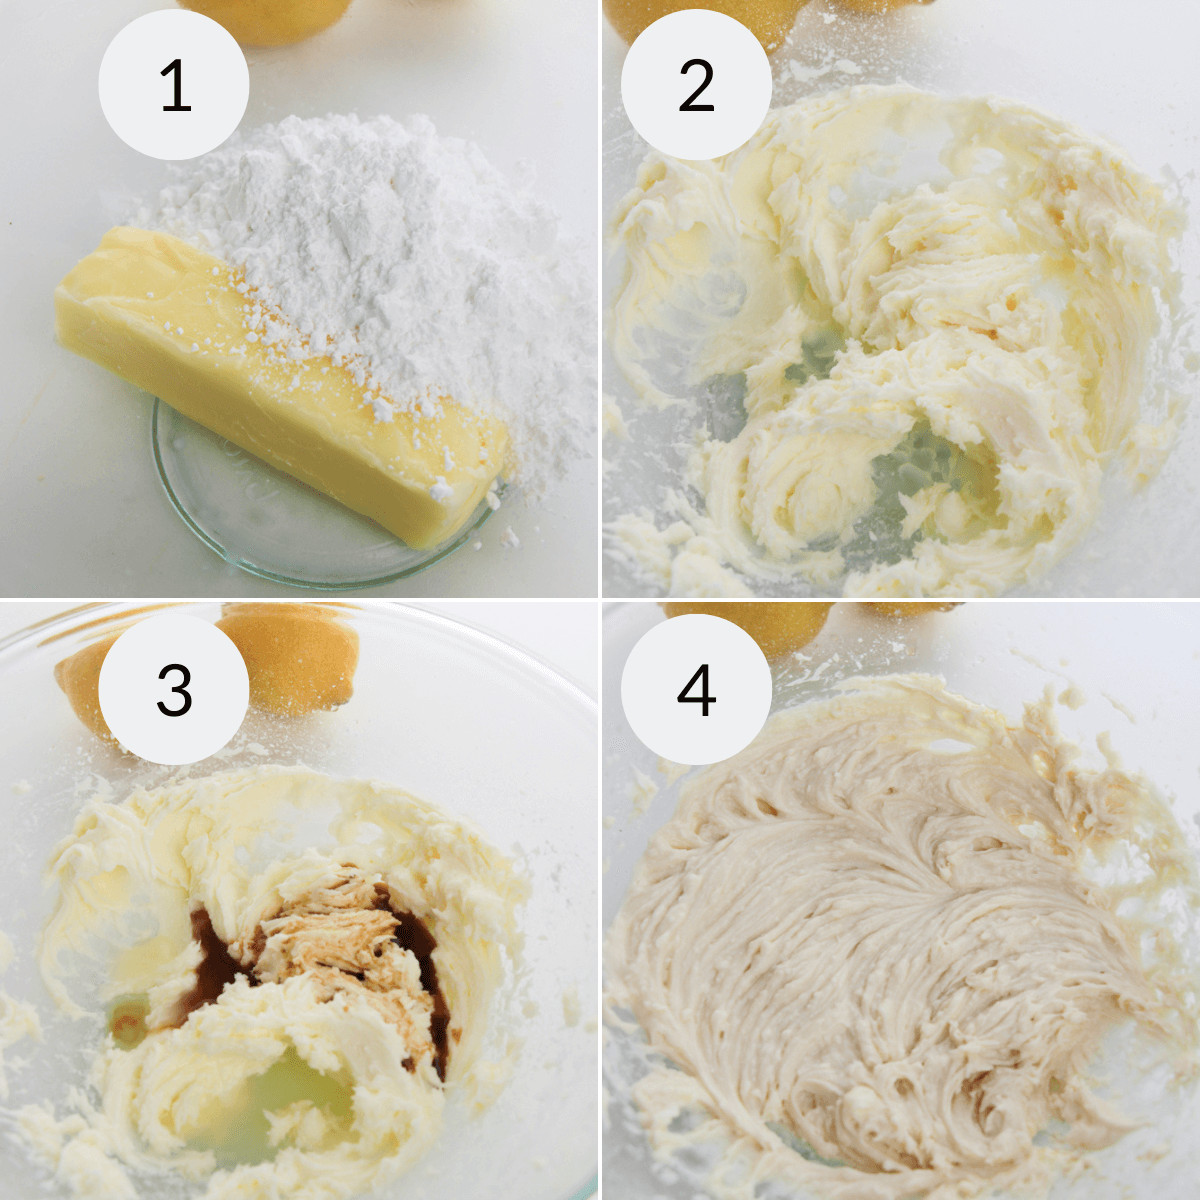 Make the cookie dough by creaming the wet and dry ingredients.